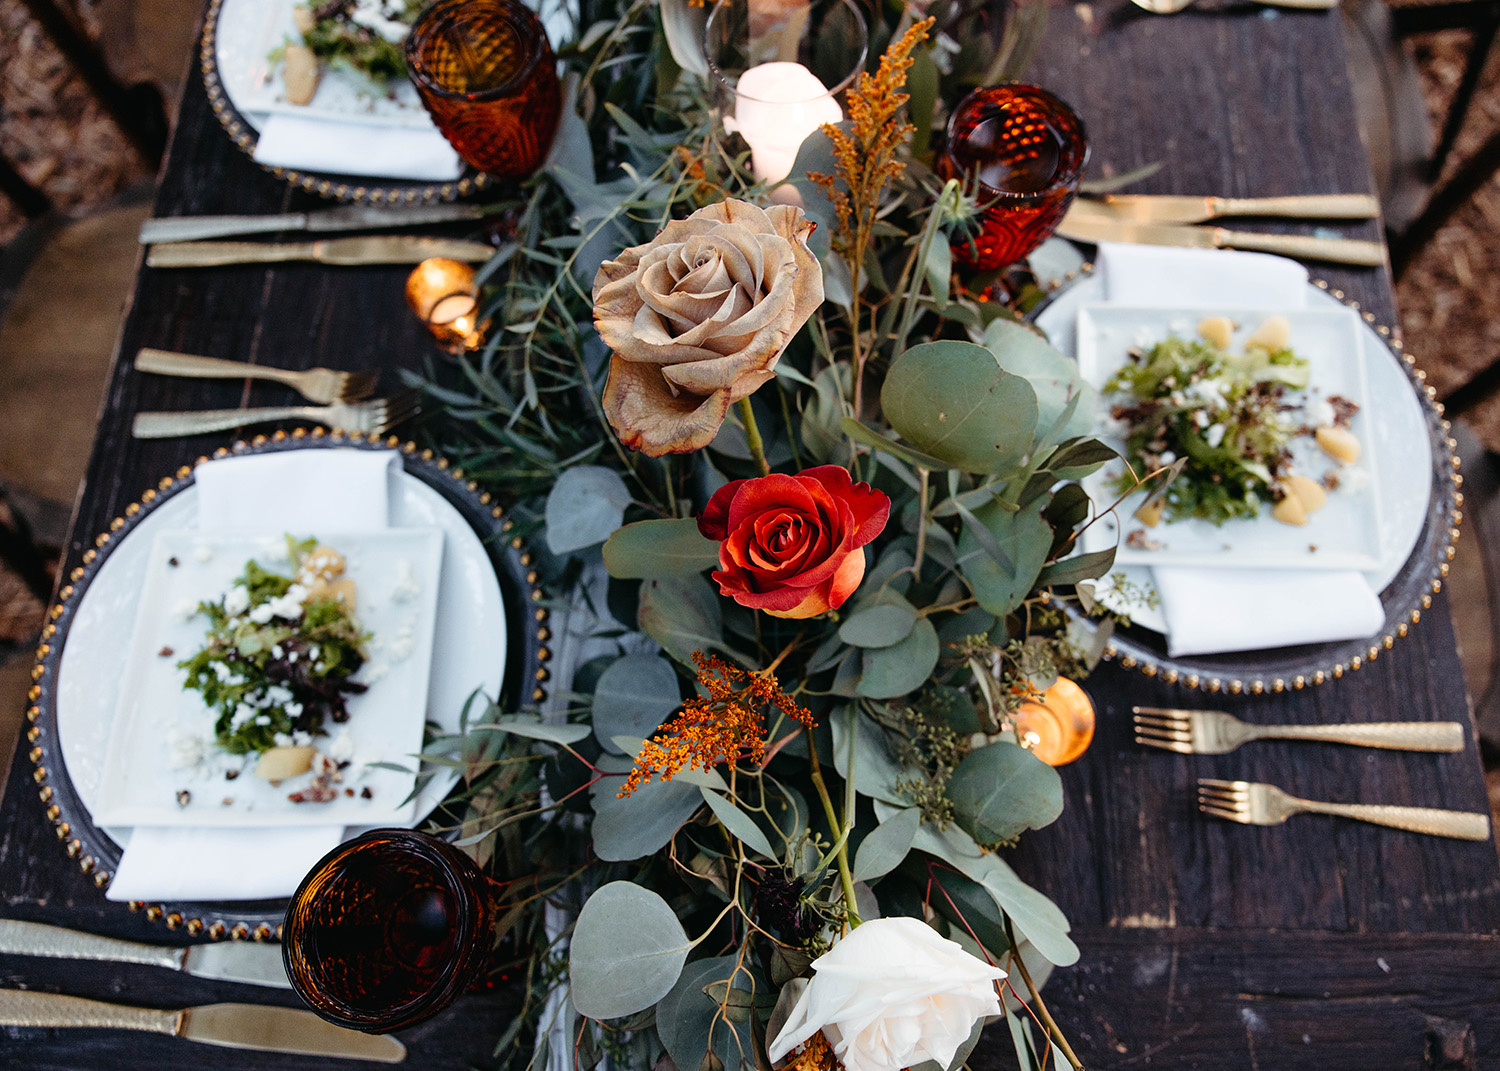 Arranged table with florals in the center.